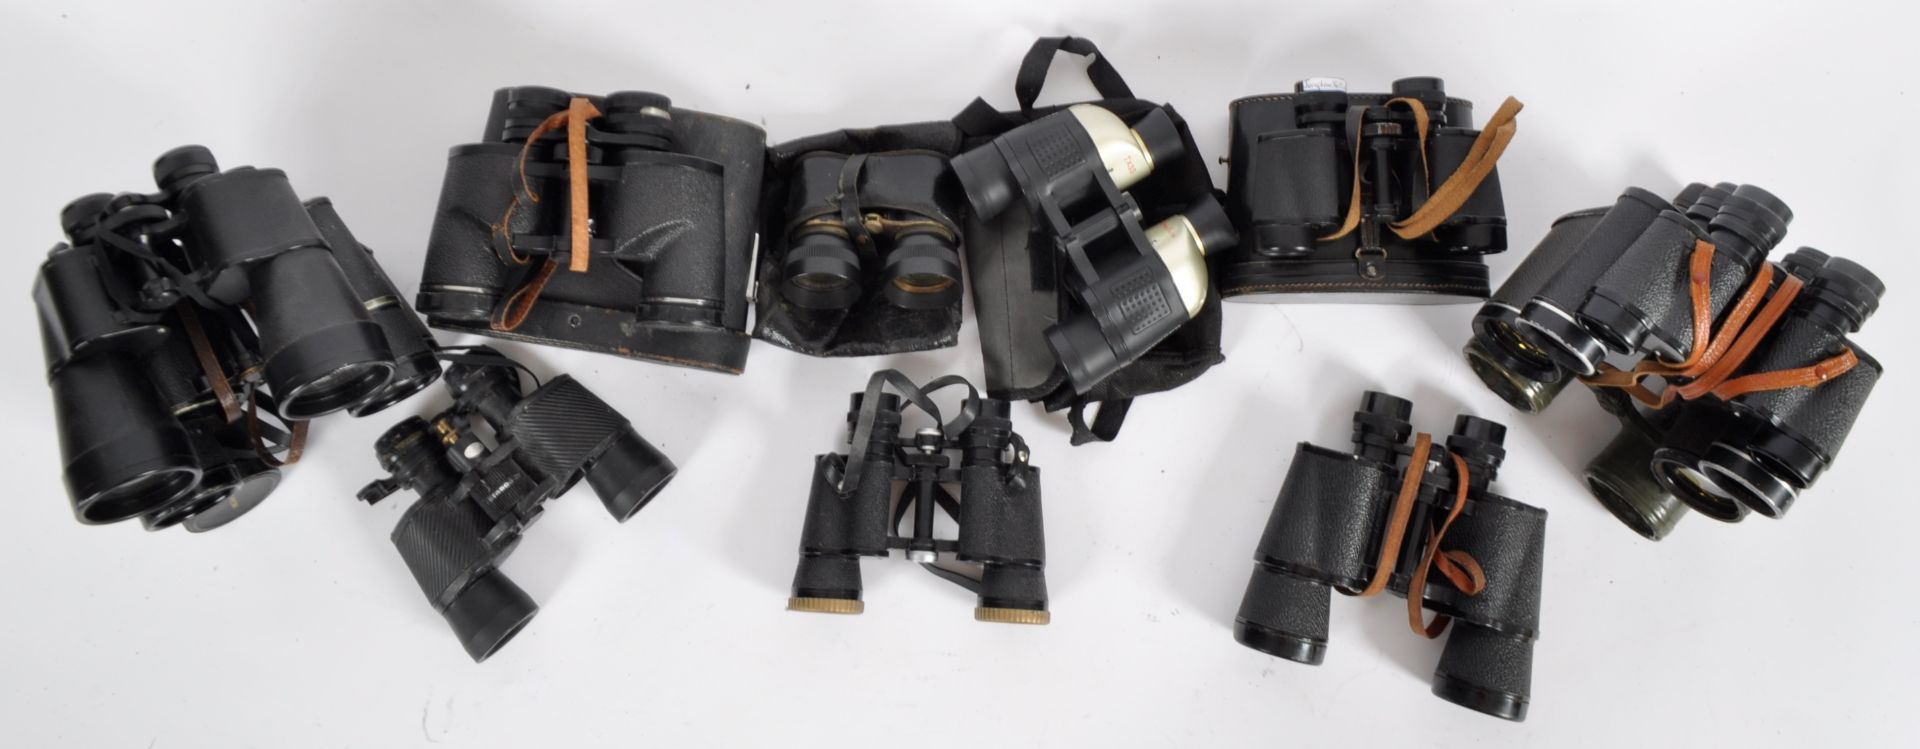 MIXED COLLECTION OF VINTAGE BINOCULARS - Image 6 of 6